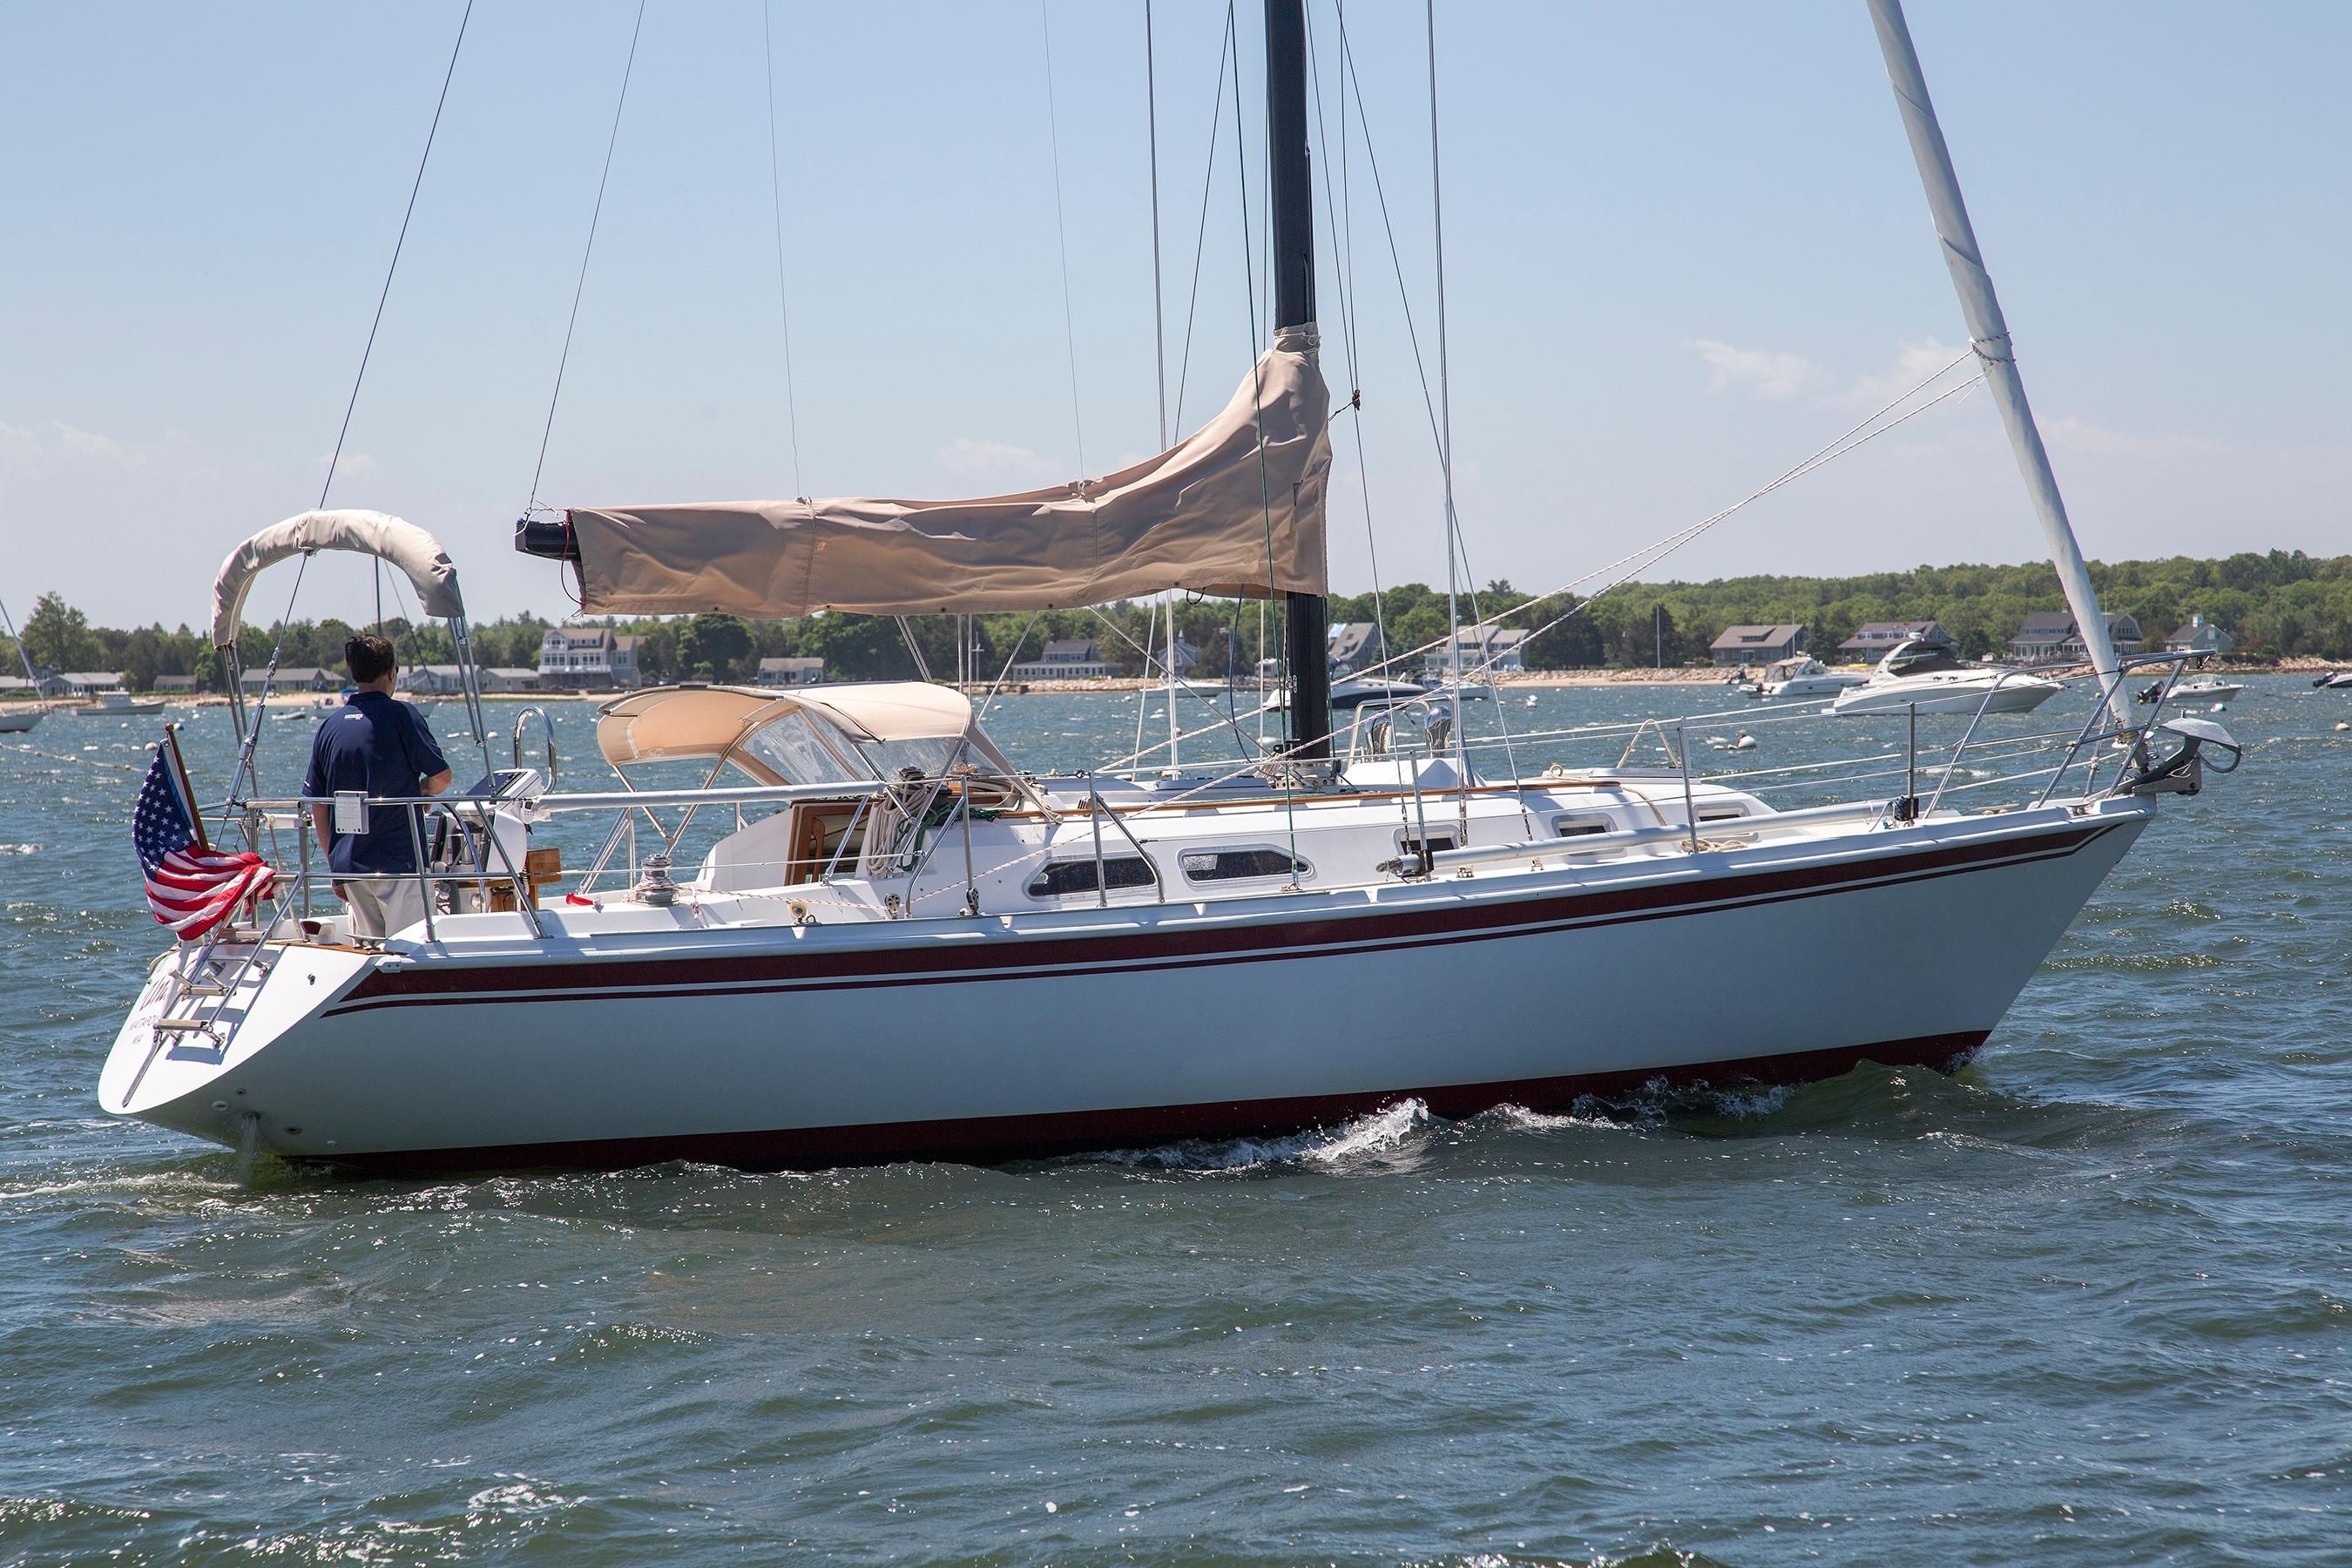 35 foot sailboat for sale ontario